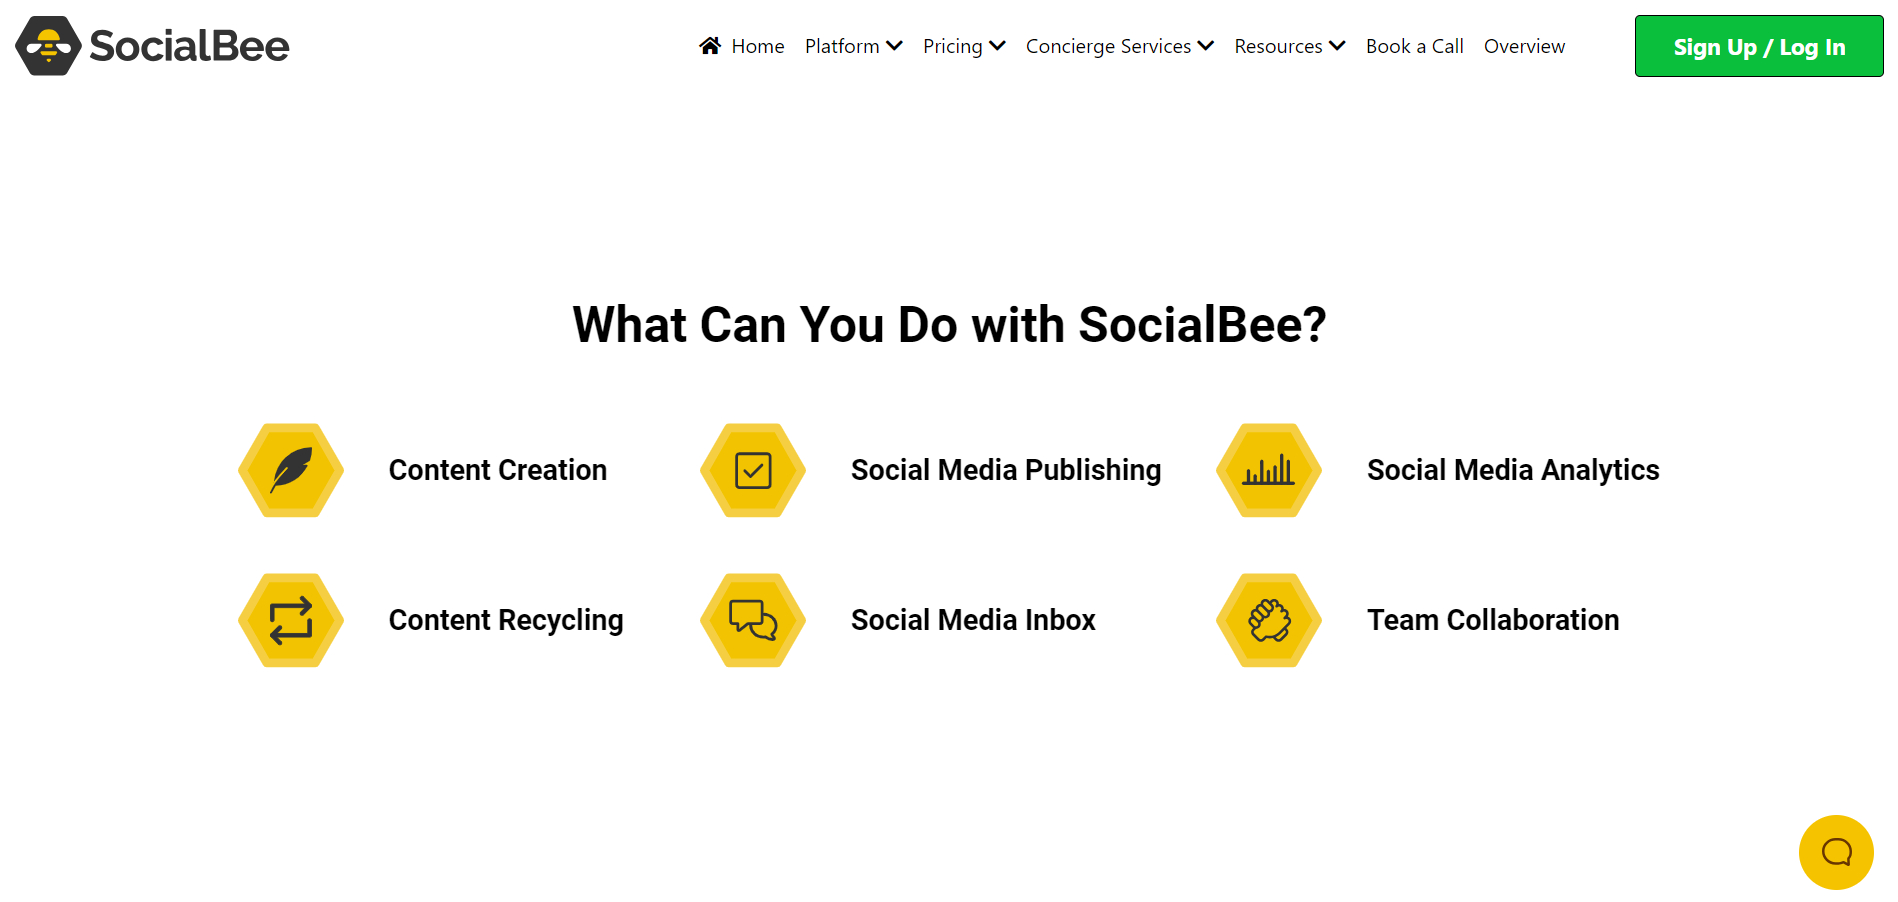 SocialBee helps you manage multiple accounts